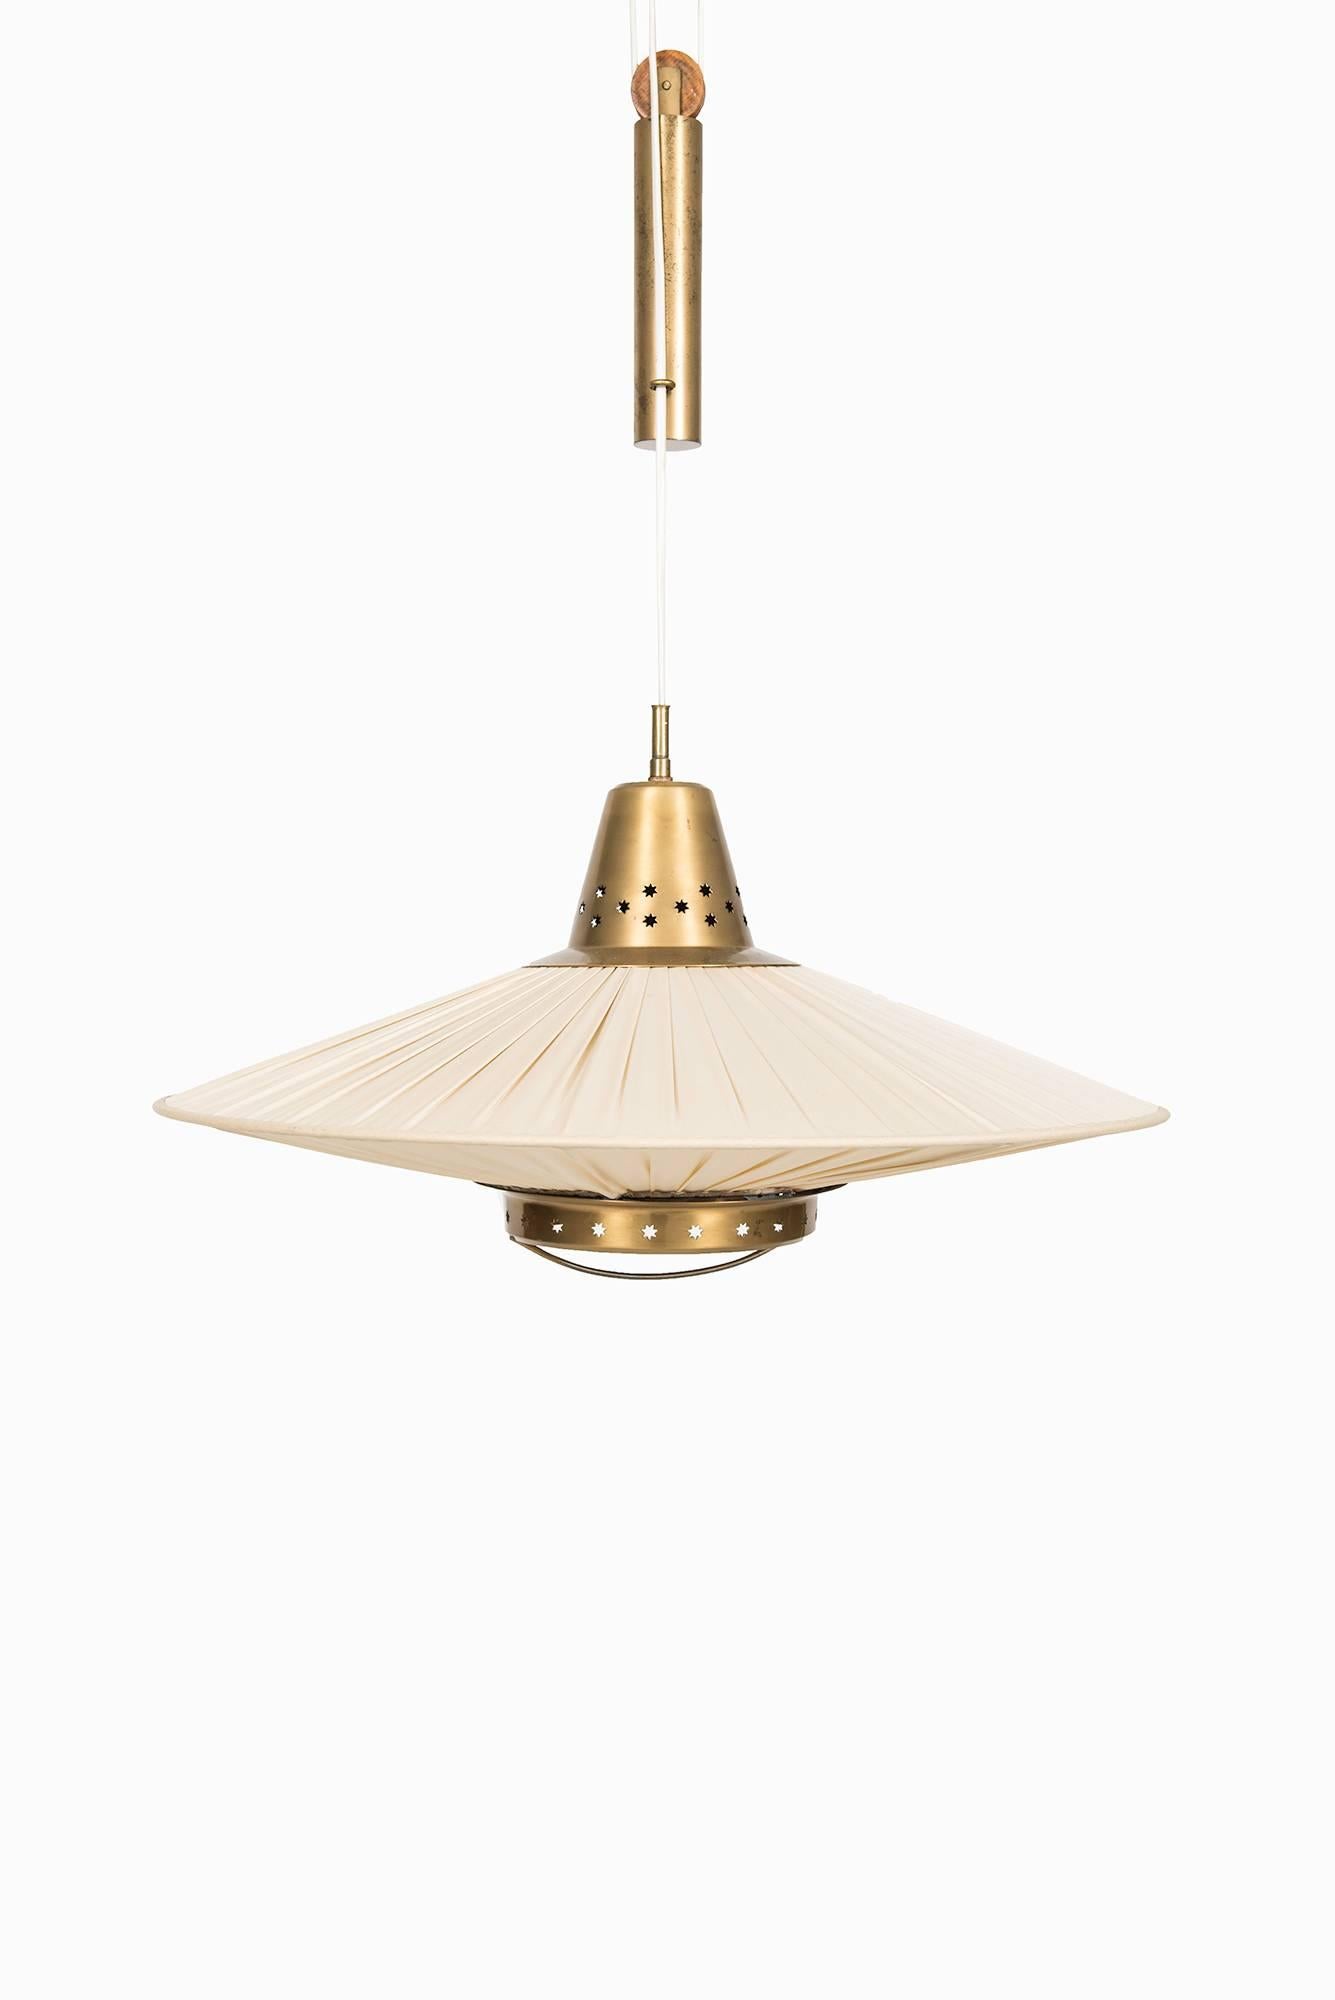 Mid-Century Modern Hans Bergström Attributed Ceiling Lamp by Bergboms in Sweden